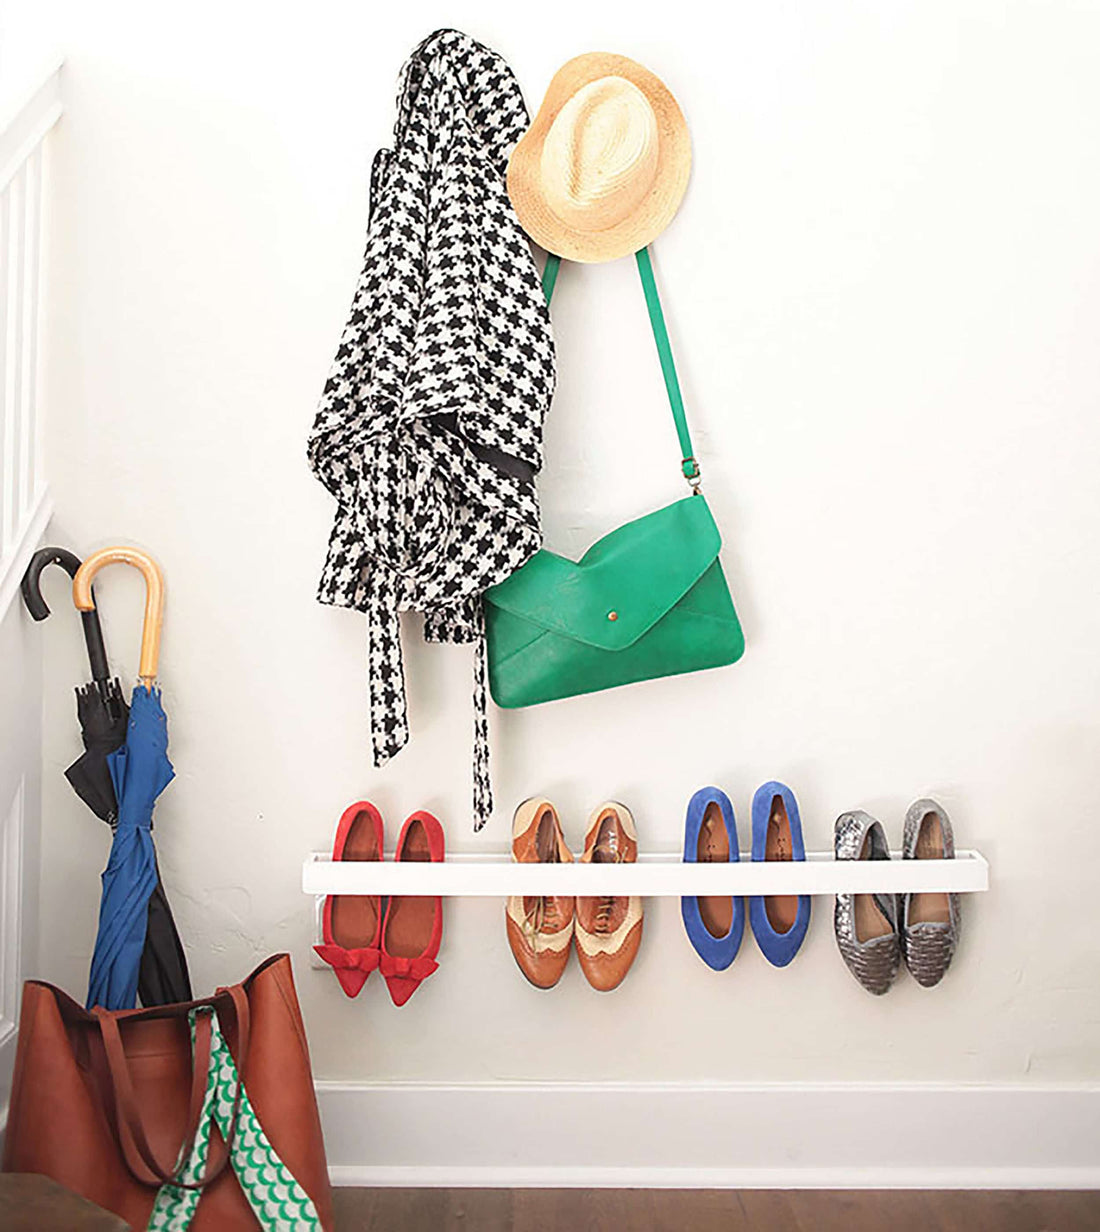 My Former DIY Stylish Organizing Ideas And The Affordable (And Stylish) Options I Would Actually Buy Now